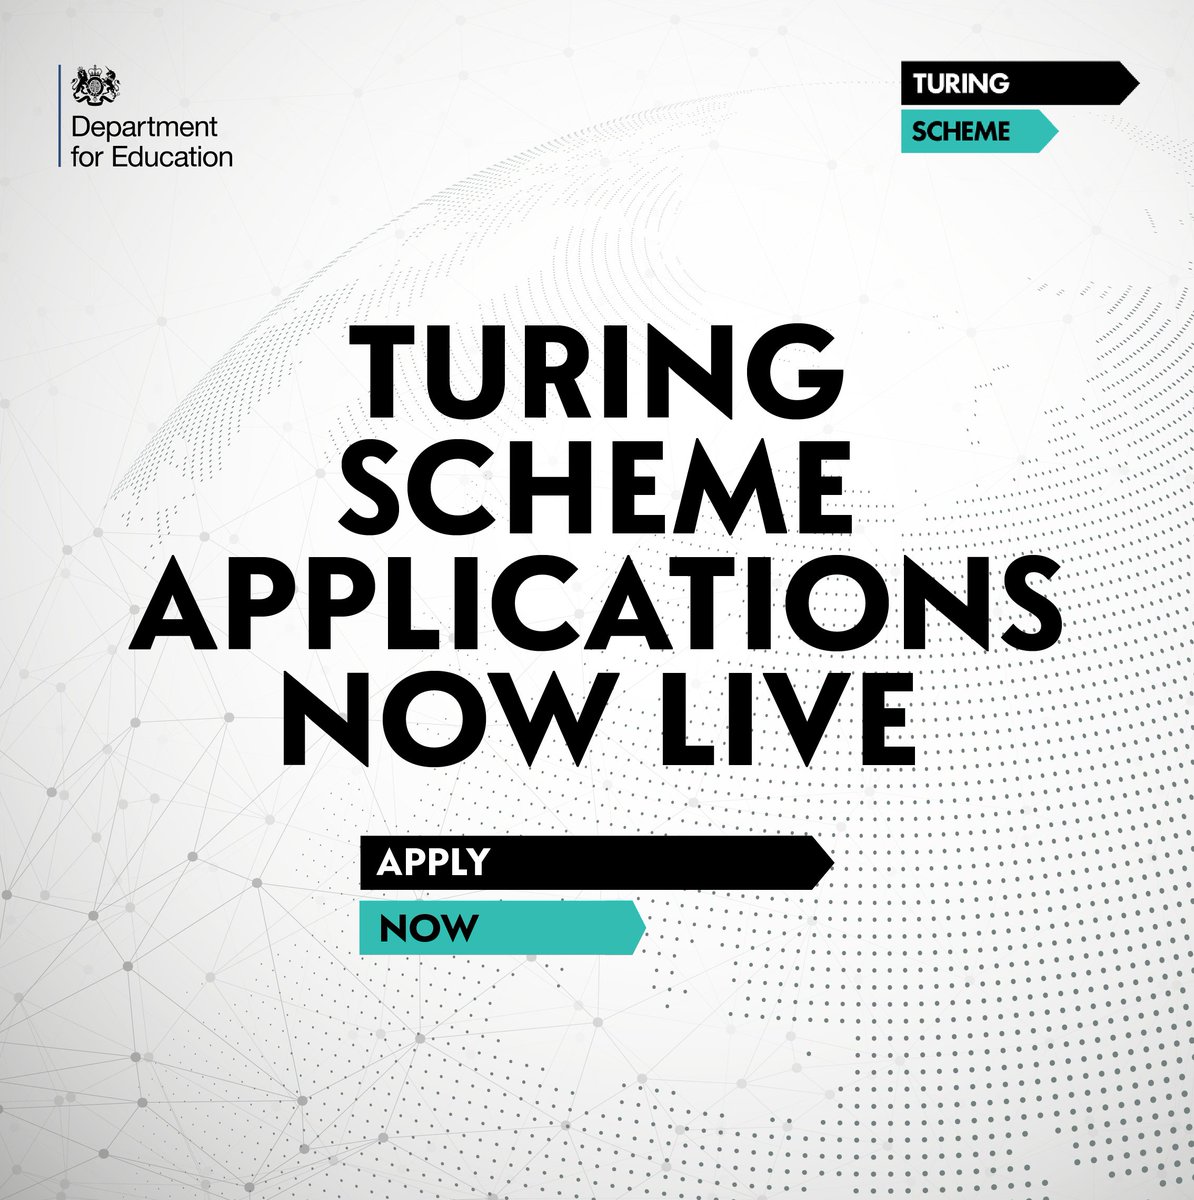 📣 Applications for the next year of the @TuringScheme_UK are now open! 📈 40,000 students set to benefit this academic year ⚖ Two-thirds of which are from disadvantaged background or underrepresented groups up from 52% from last year Apply here 👇 gov.uk/guidance/turin…